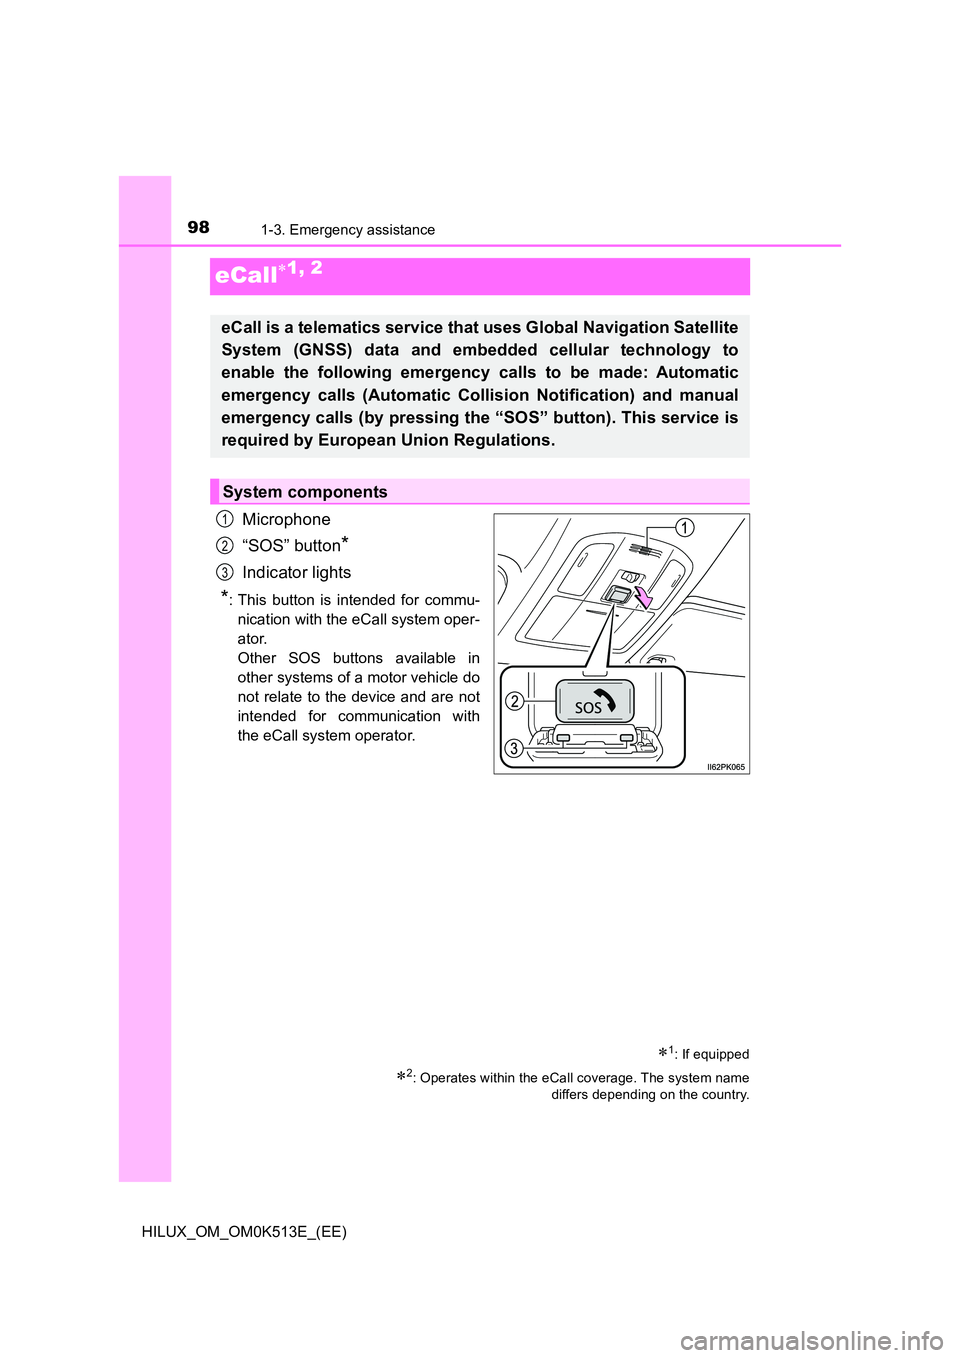 TOYOTA HILUX 2021  Owners Manual (in English) 981-3. Emergency assistance
HILUX_OM_OM0K513E_(EE)
eCall1, 2
Microphone 
“SOS” button*
Indicator lights
*: This button is intended for commu- 
nication with the eCall system oper-
ator.
Other S